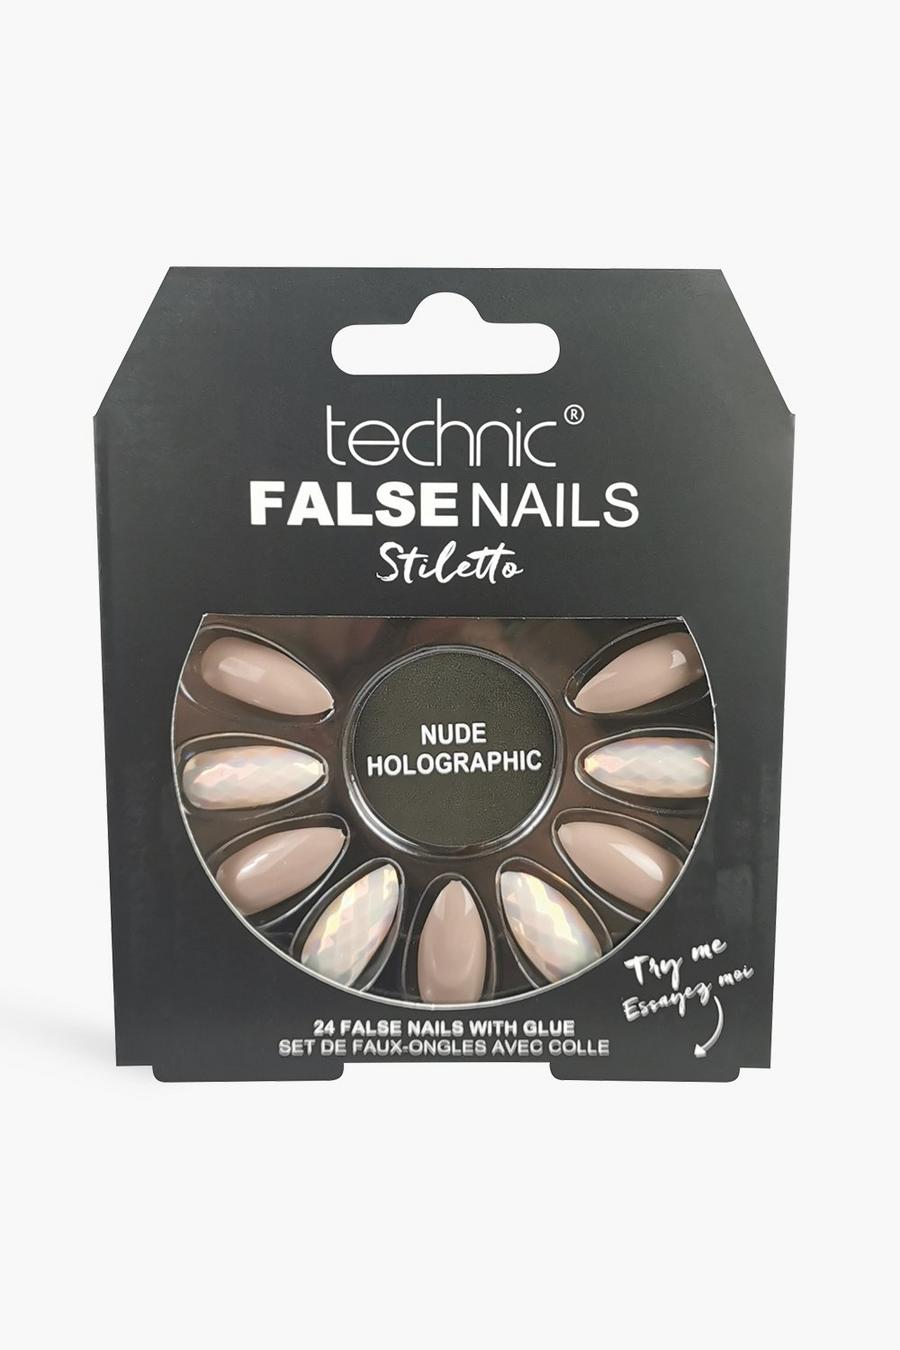 Technic False Nails - Faux ongles - Nude Holographic, Couleur chair nude